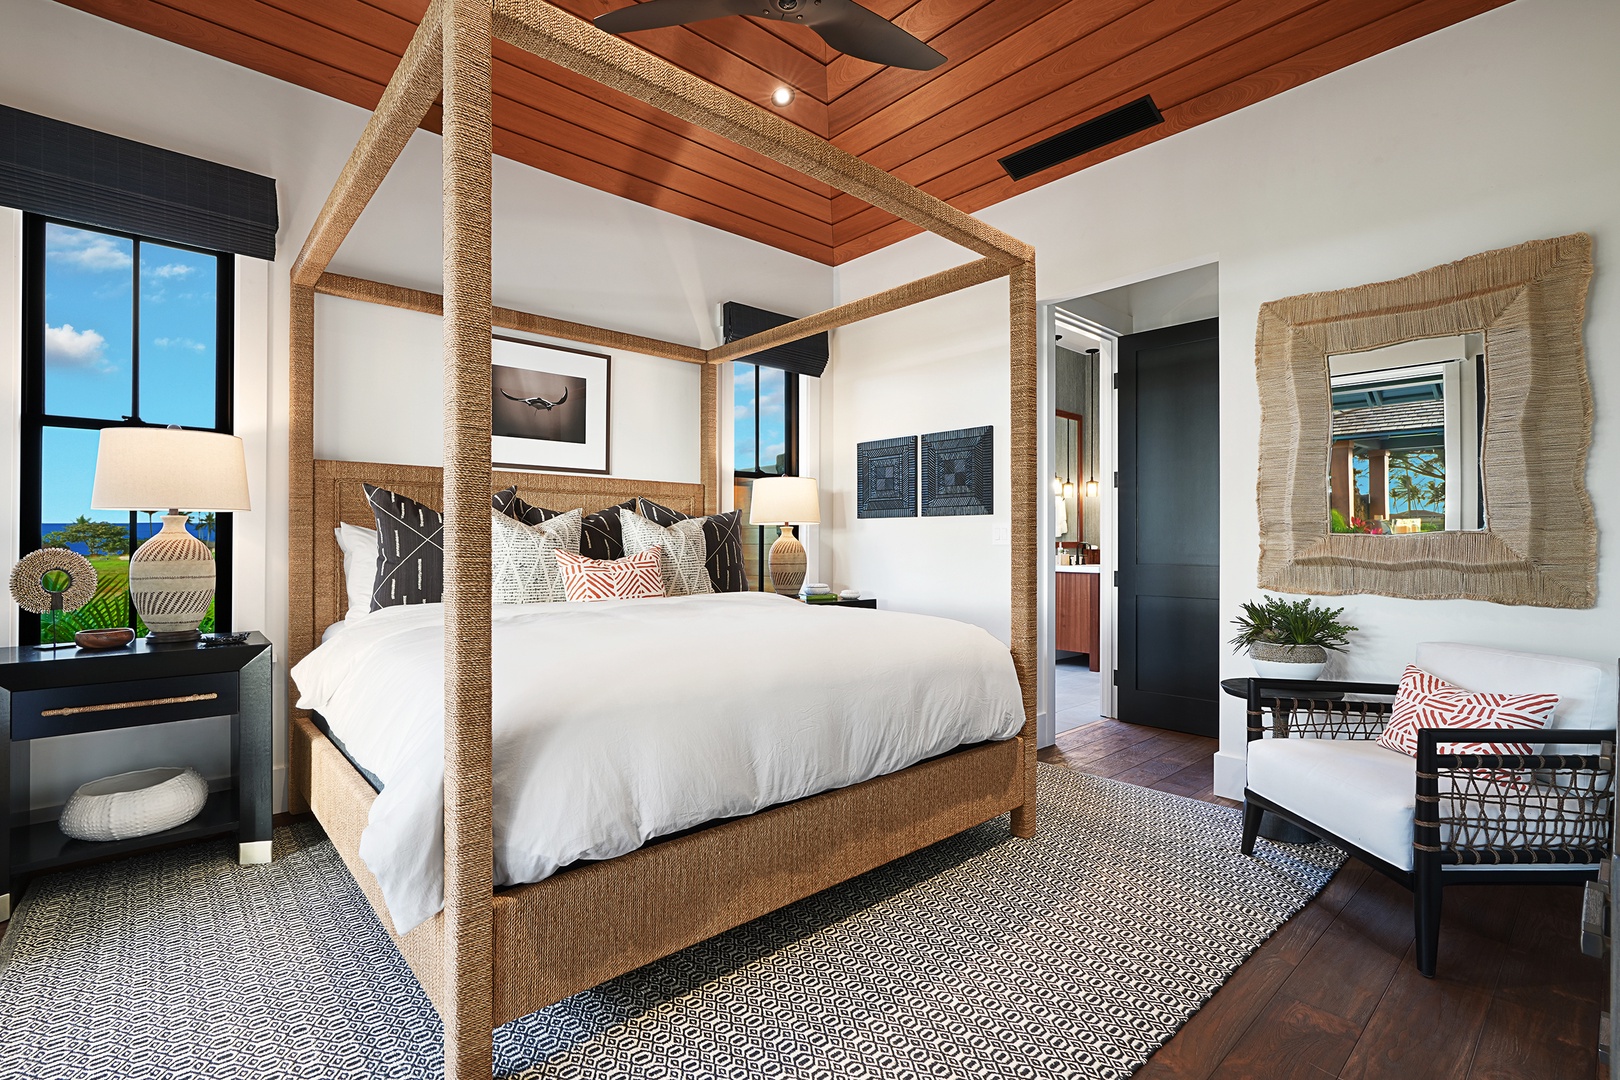 Koloa Vacation Rentals, Hale Pakika at Kukui'ula - The guest bedroom features king bed with lofted ceilings and a restful night.